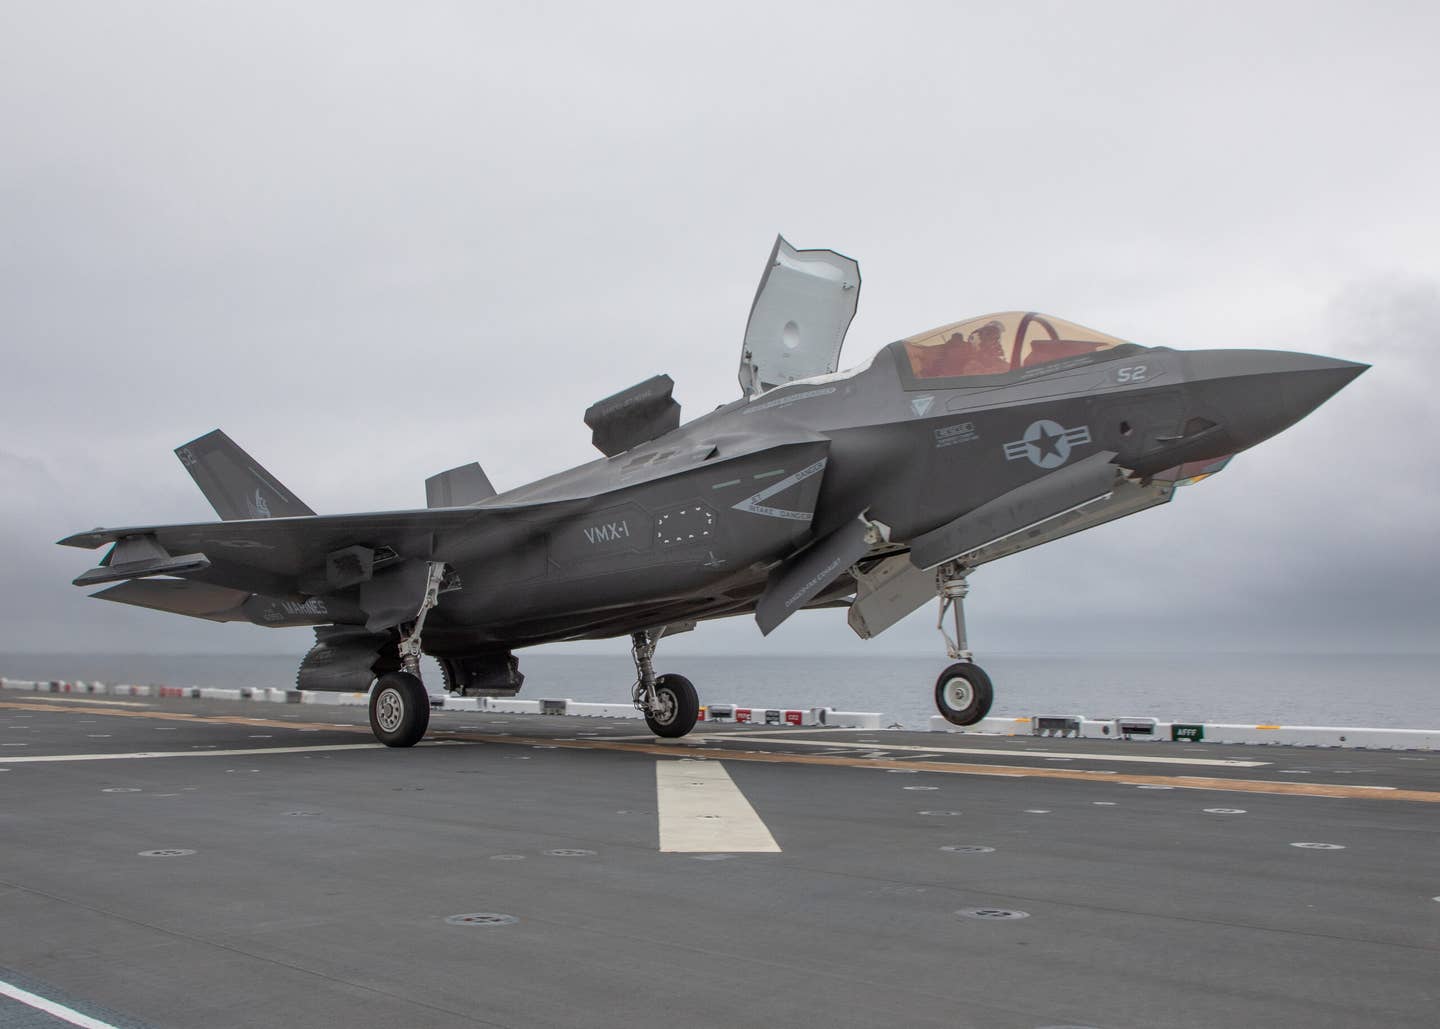 VMX-1 F-35B launched from a big deck amphibious assault ship. (Author's photo)